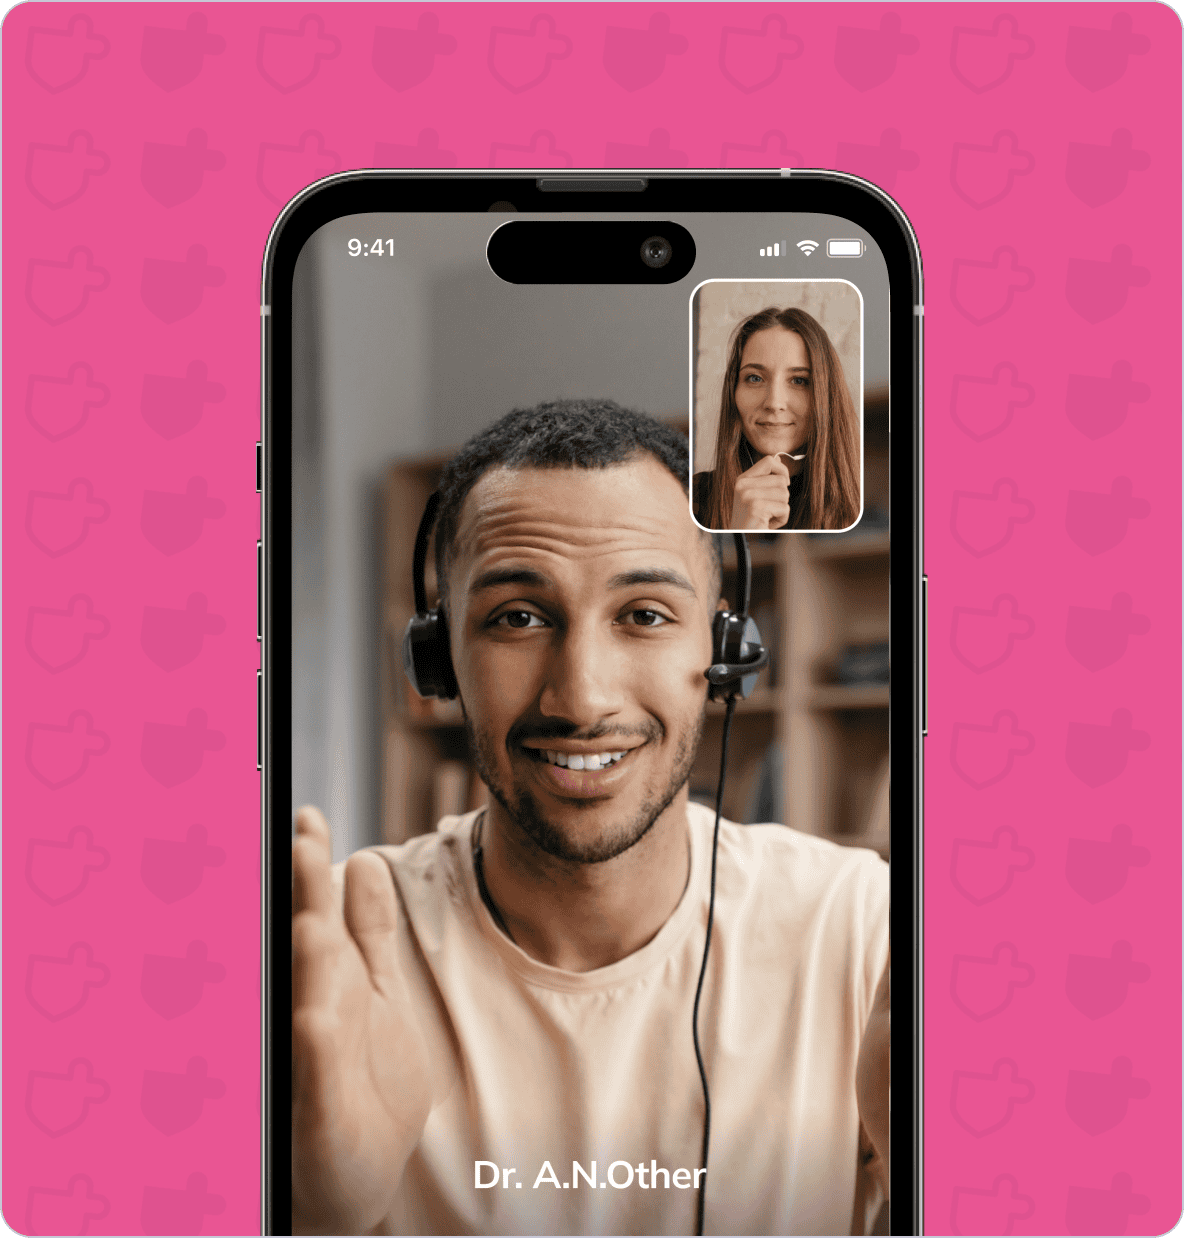 A smartphone screen displays a video call between a man wearing a headset and a woman. The man has a label that reads "Dr. A.N.Other." The background is a pink pattern.